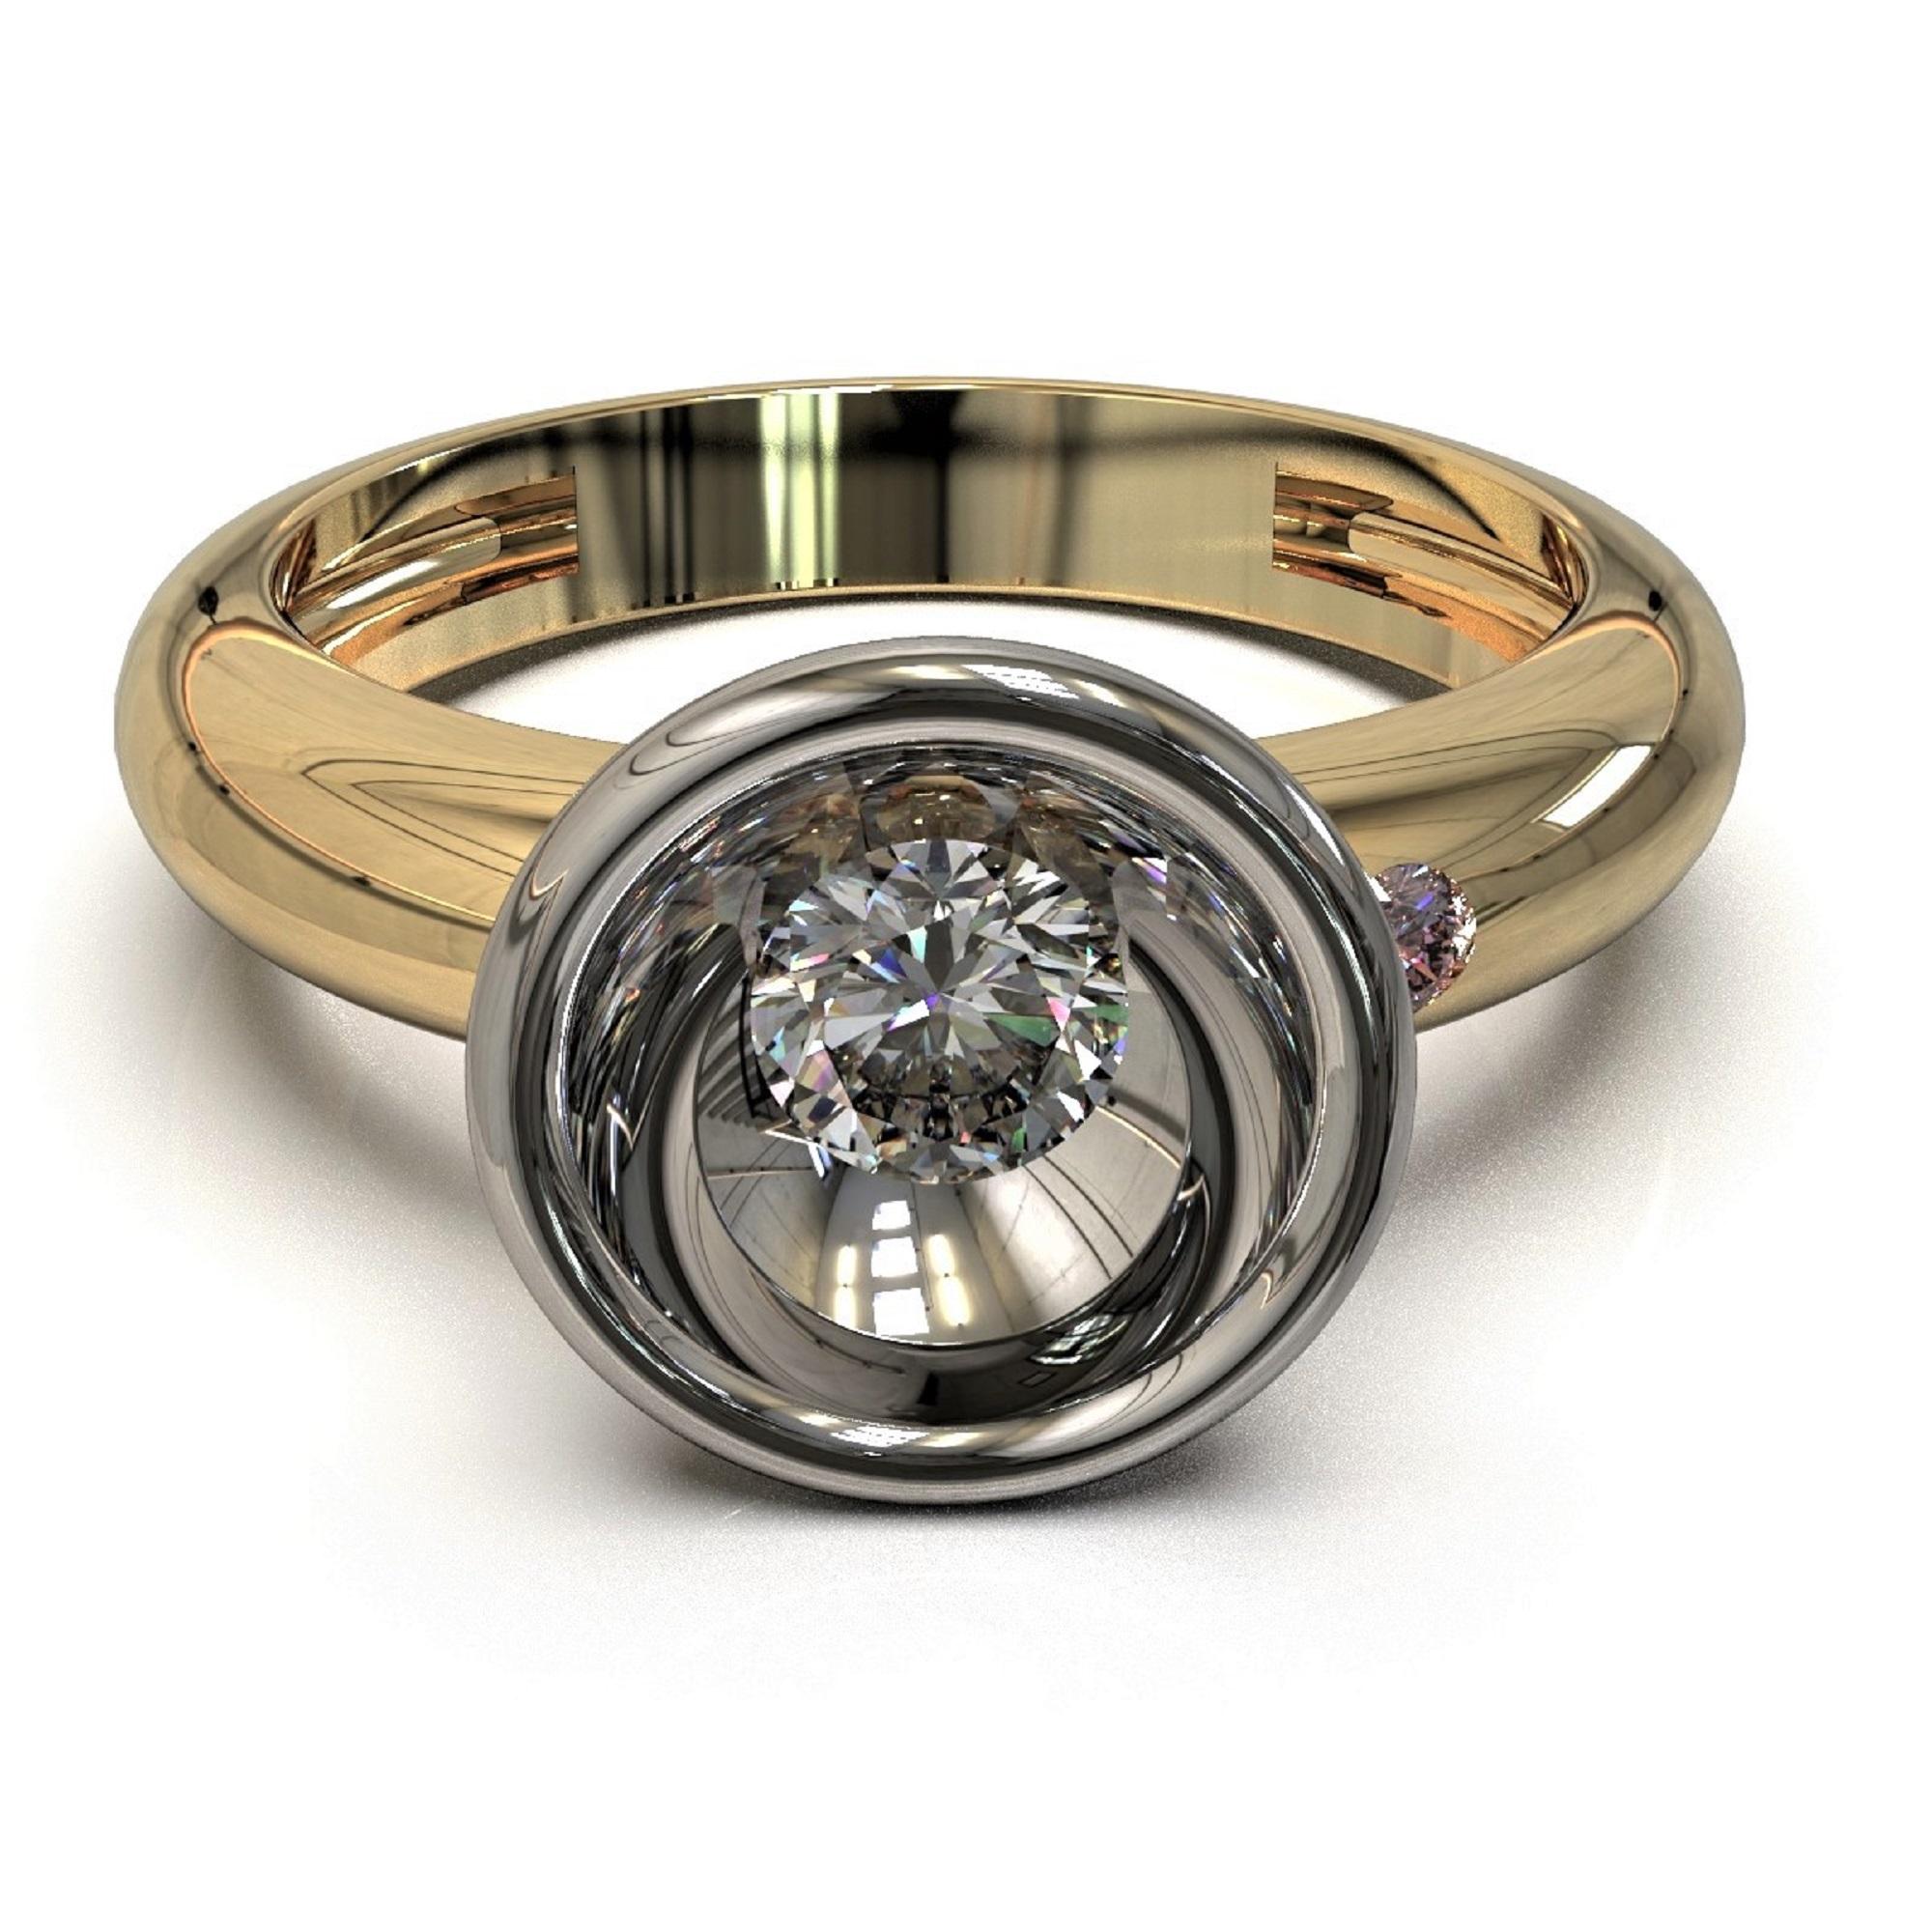 Bianca & Oro Vintage Ring

This lovely ring has a modern air about it. It is set with a larger white diamond in the central platinum cupped setting, and a smaller Argyle fancy pink diamond is gypsy set to one side. The band has a high polish